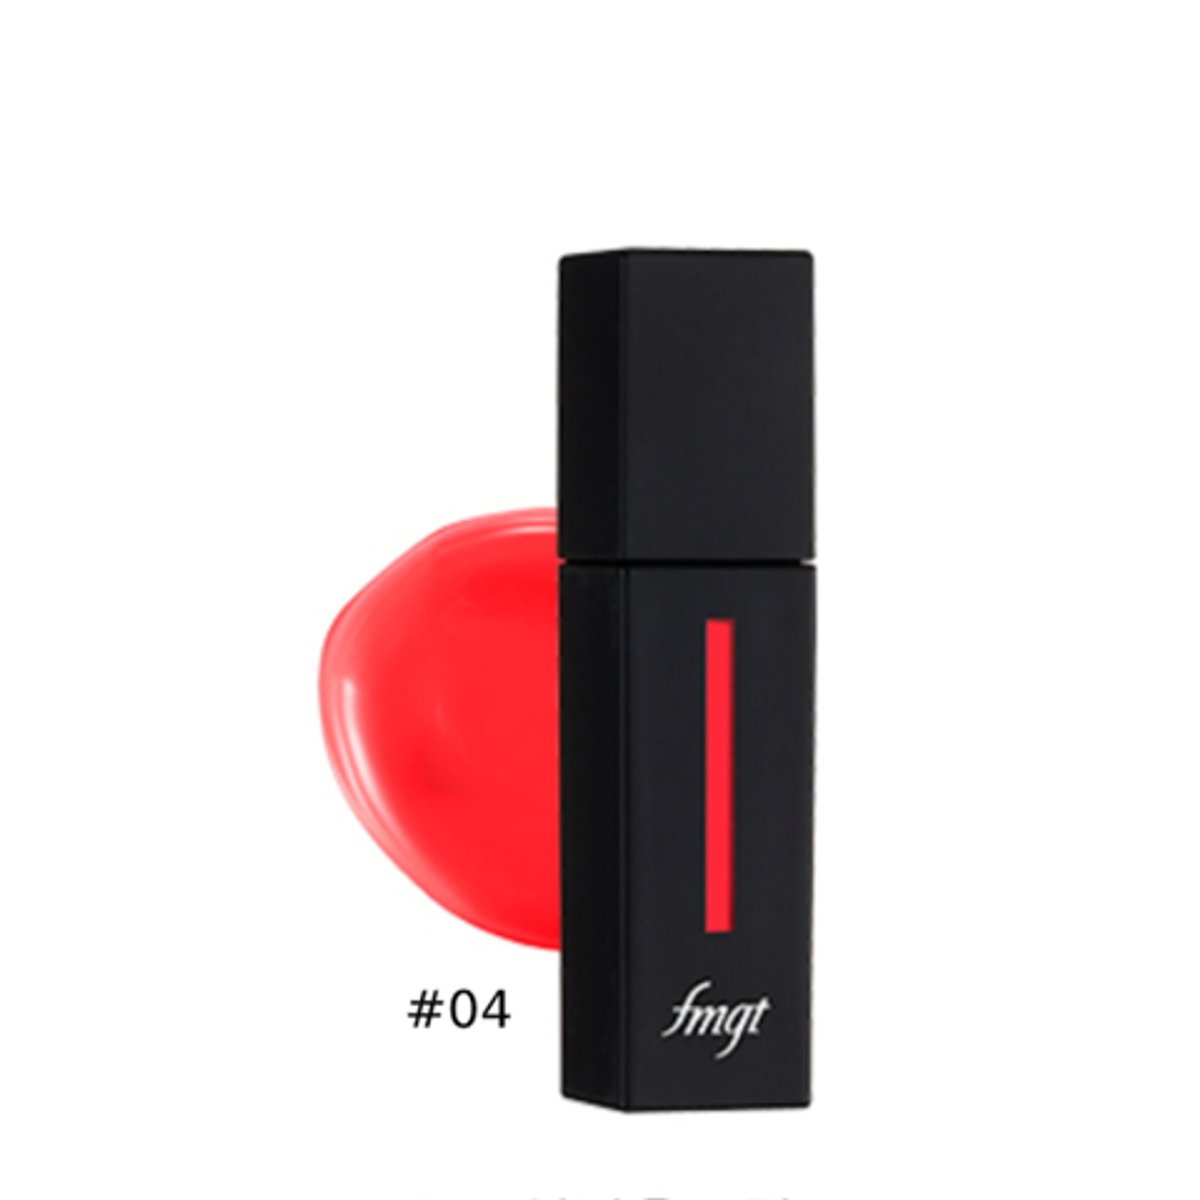 gift-fmgt-son-nuoc-li-ink-tattoo-lip-tint-5g-01-vintage-pink-04-about-coral-1